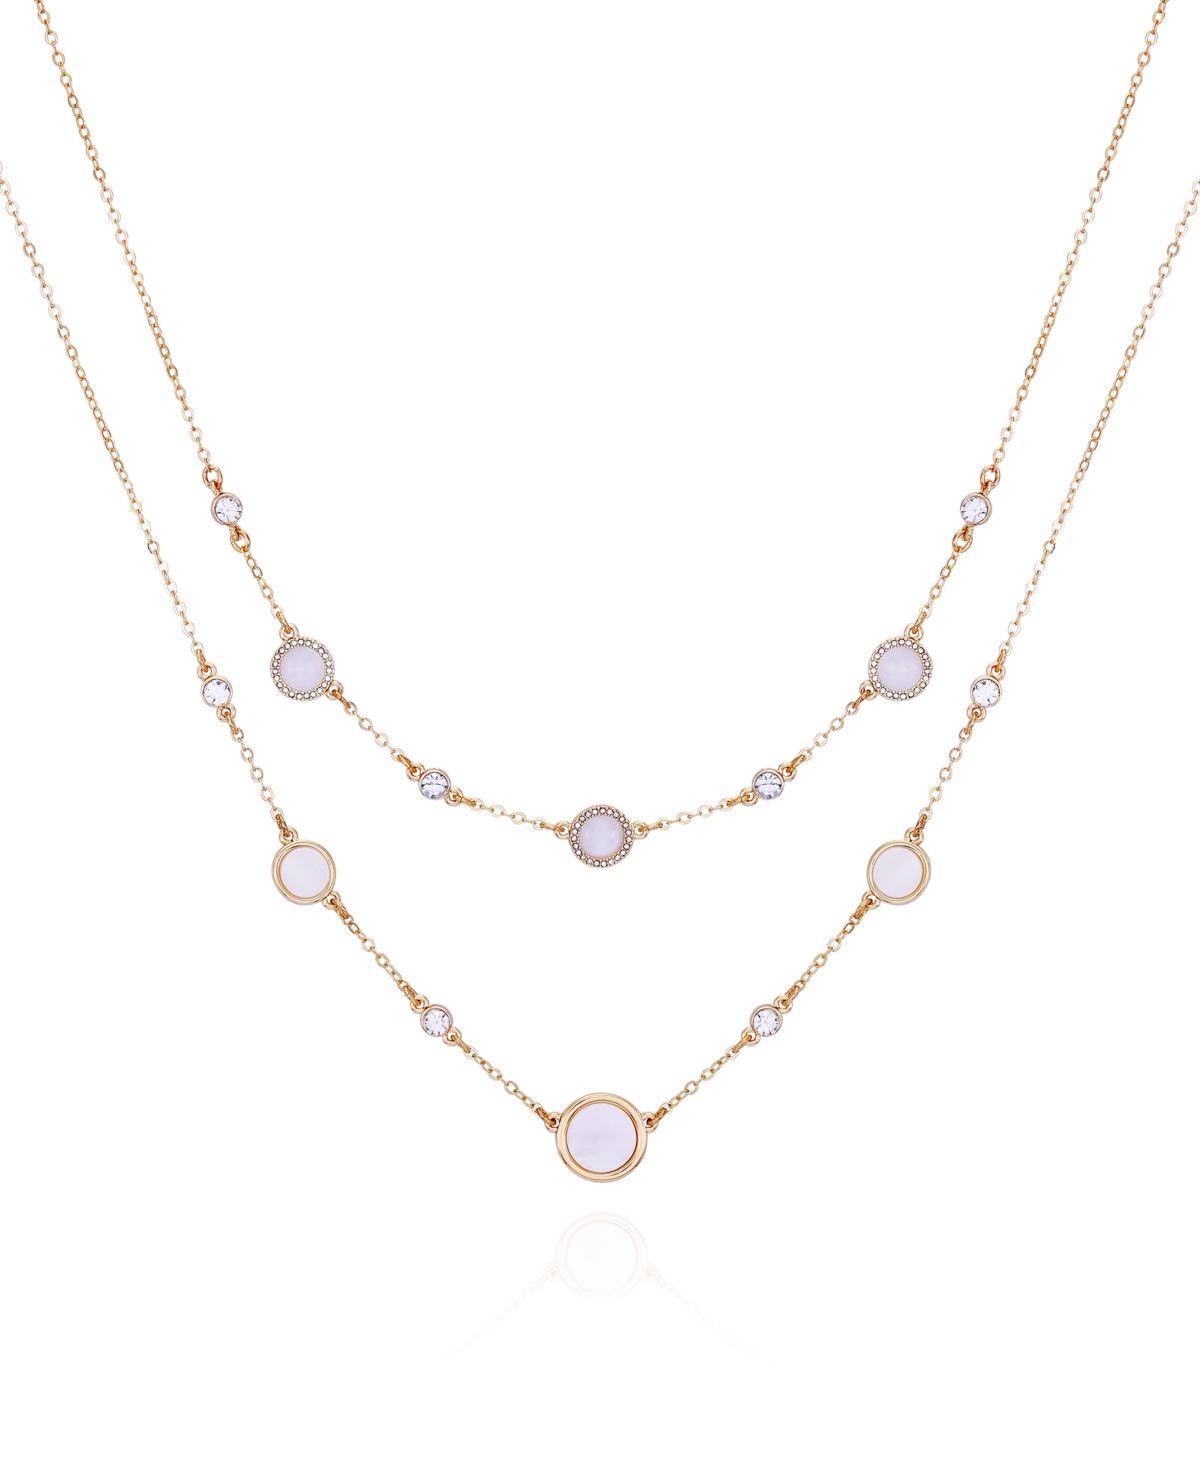 Gold-Tone Glass Stone Layered Necklace - Gold